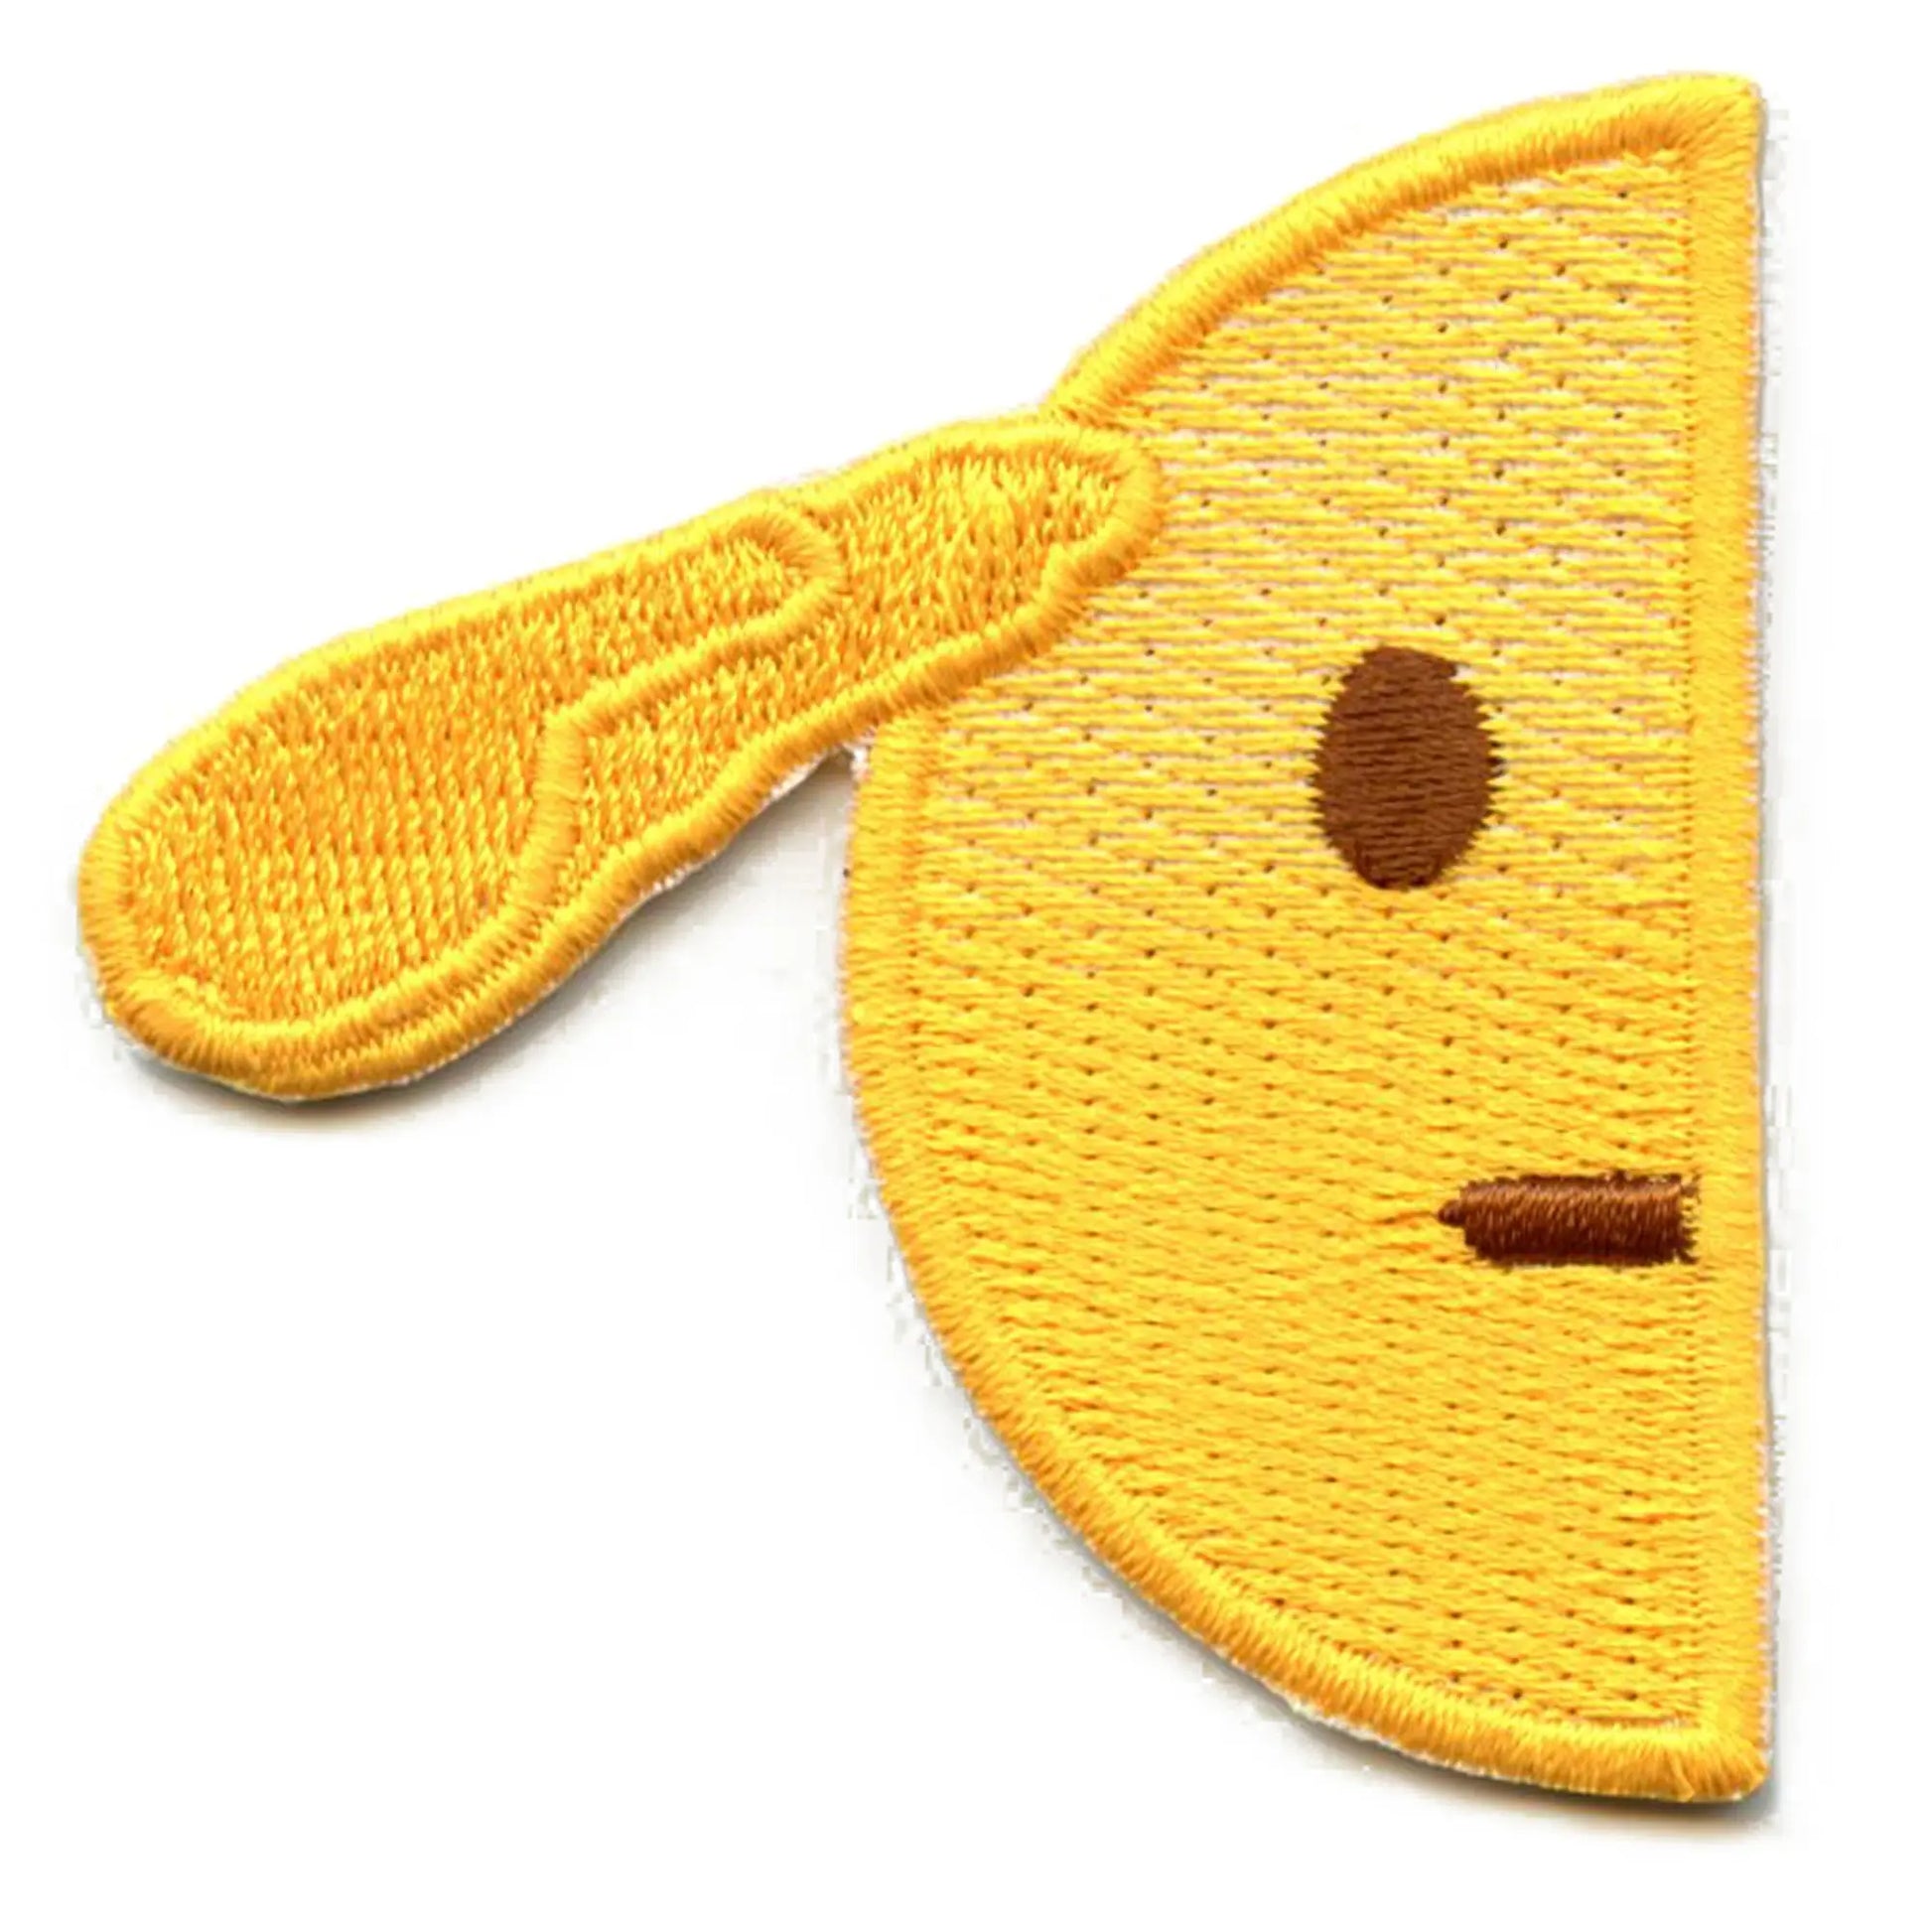 Flushed Cursed Emoji Embroidered Iron-on Patch 